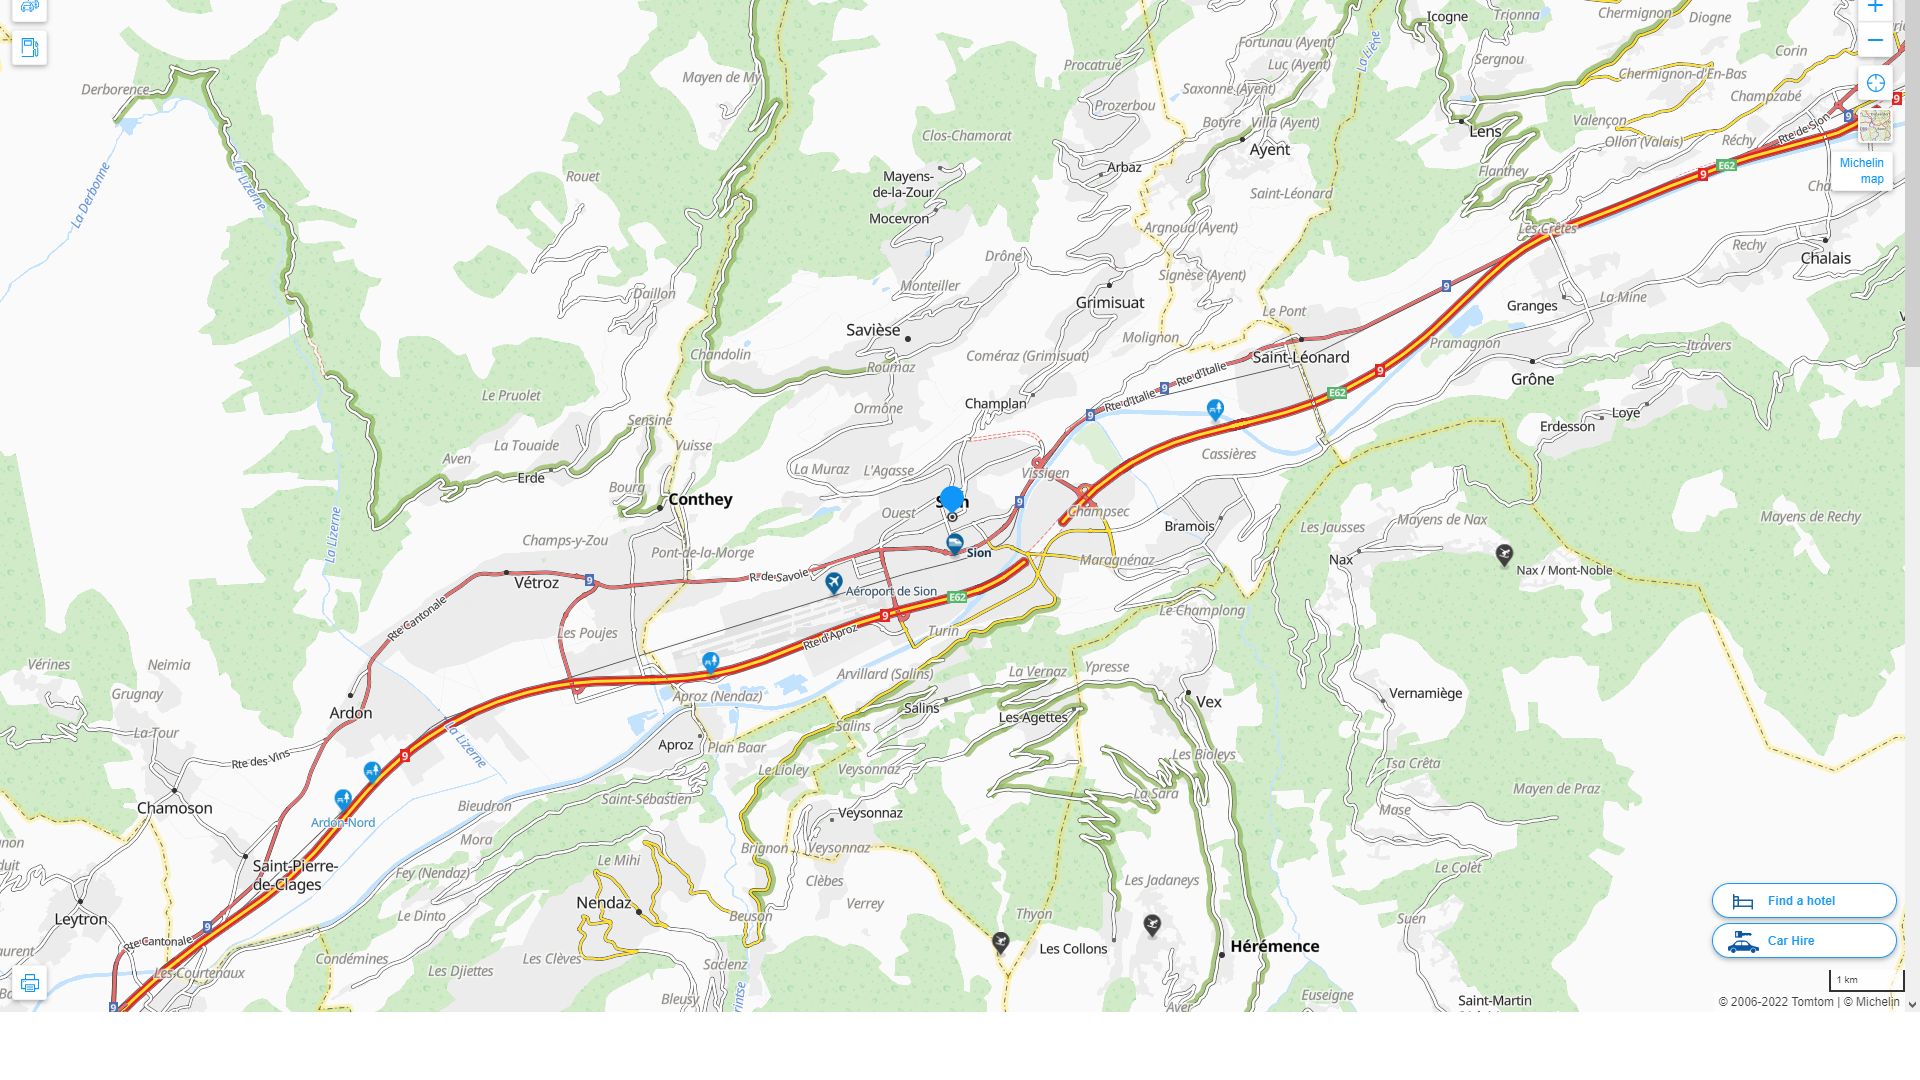 Sion Highway and Road Map